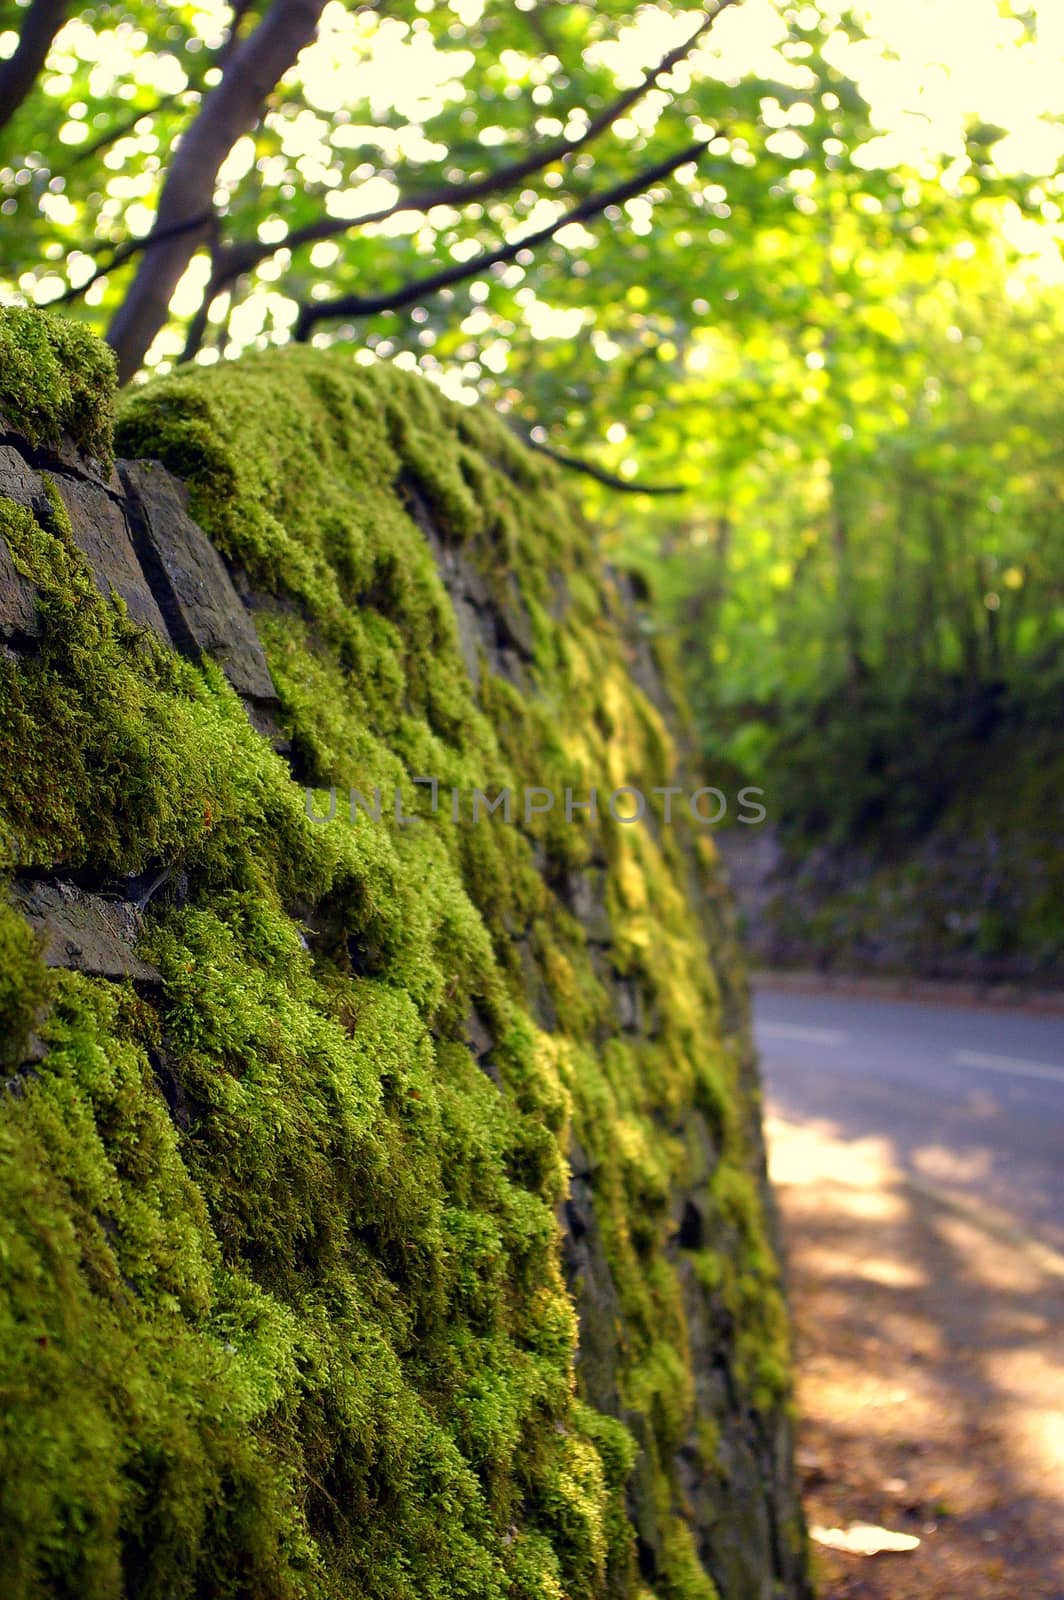 Moss covered wall next to a road by flaneur9